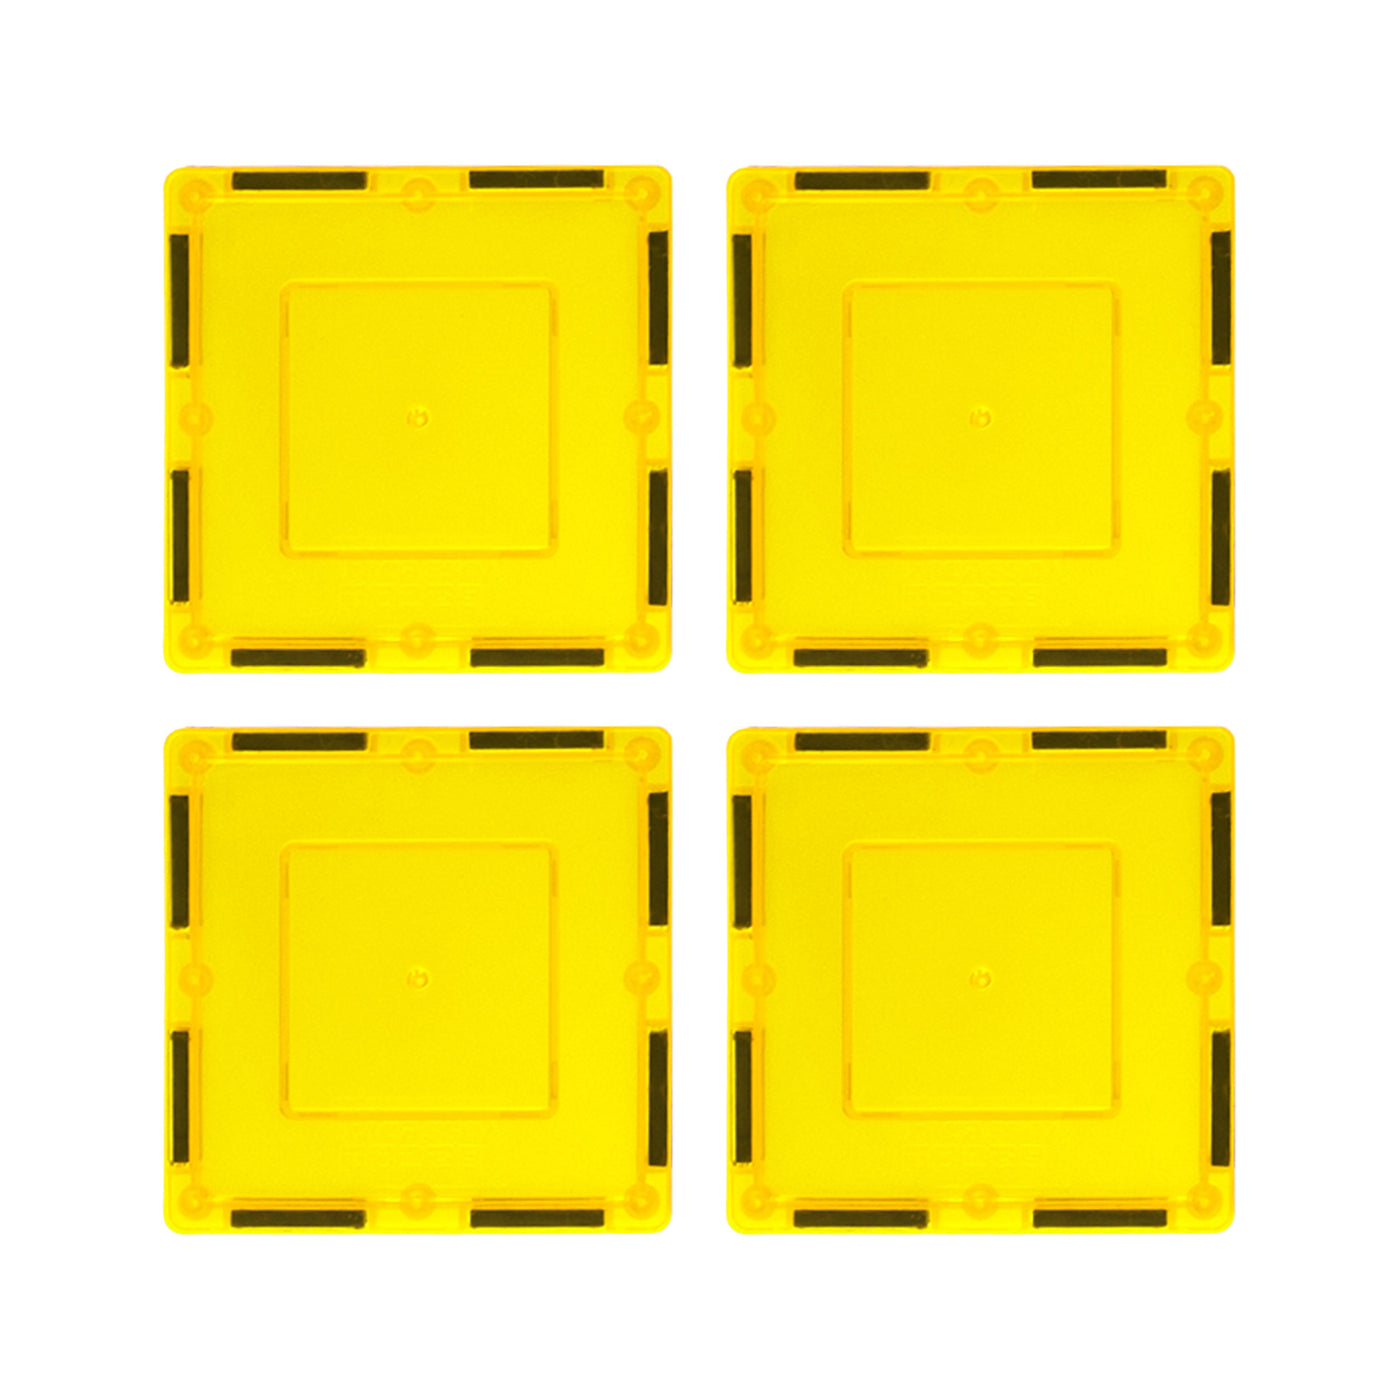 PicassoTiles 4 Piece 3" x 3" Yellow Square Magnetic Tiles